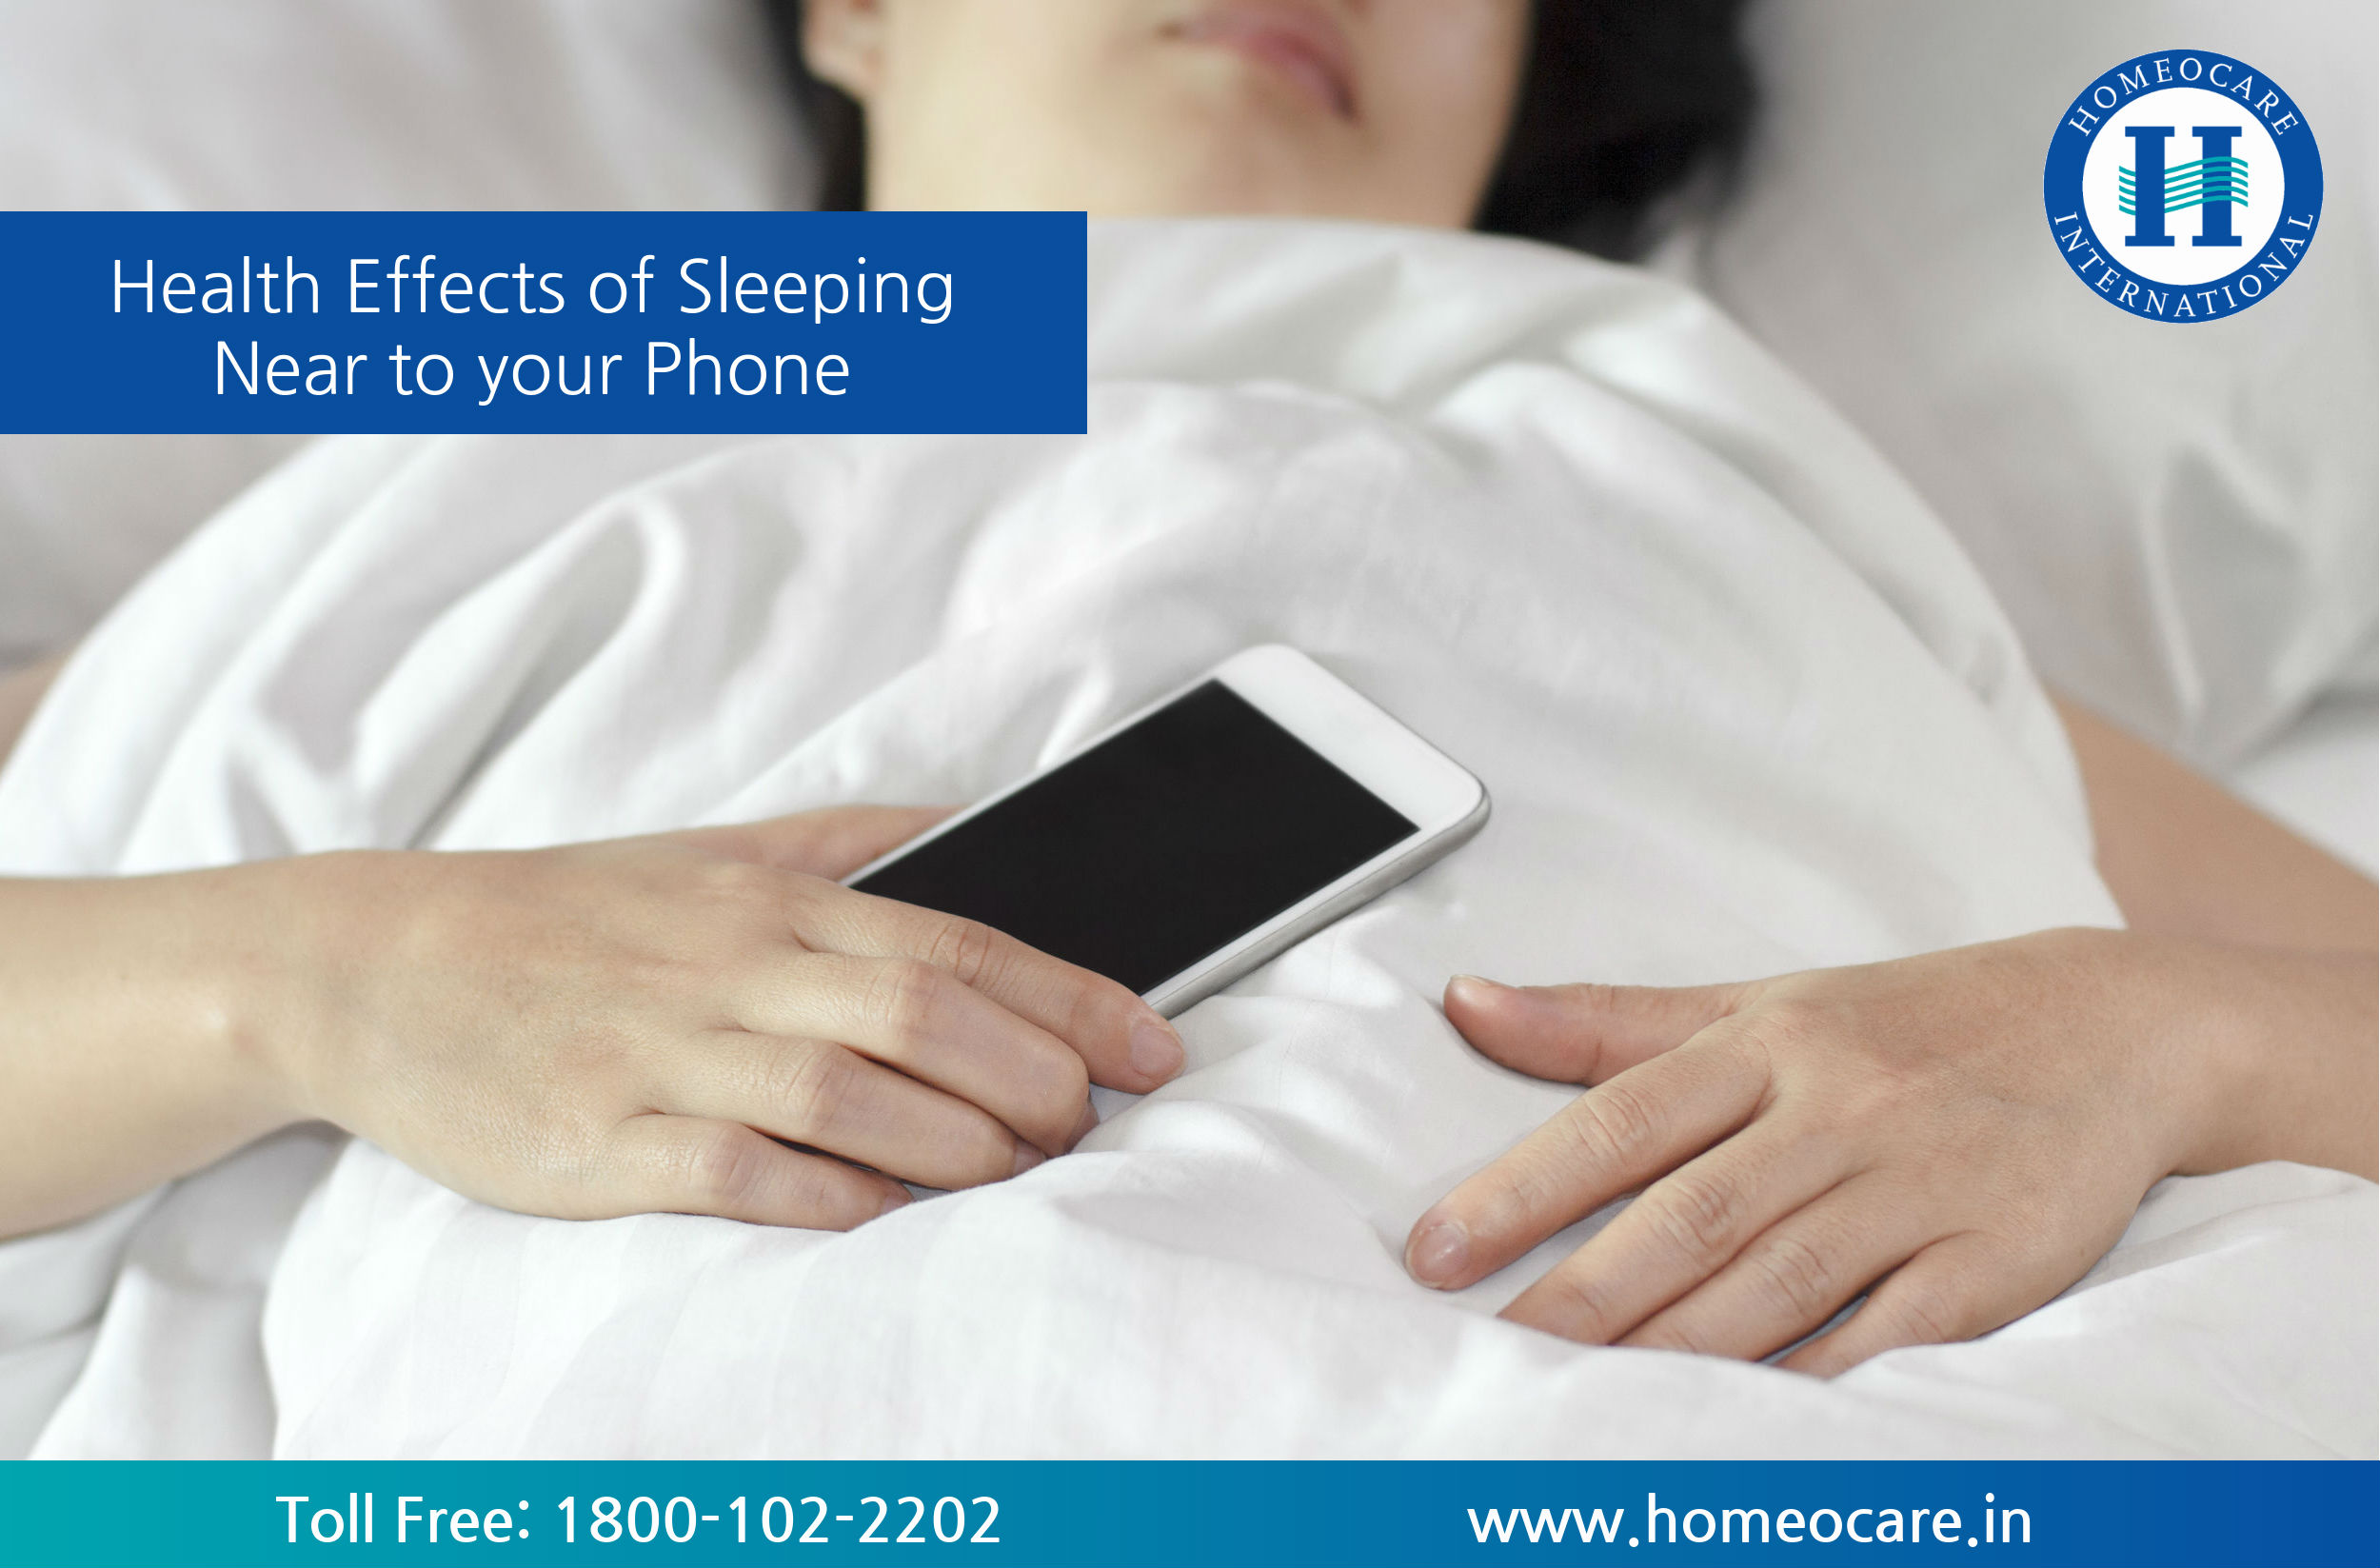 Health Effects of Sleeping Near to your Phone